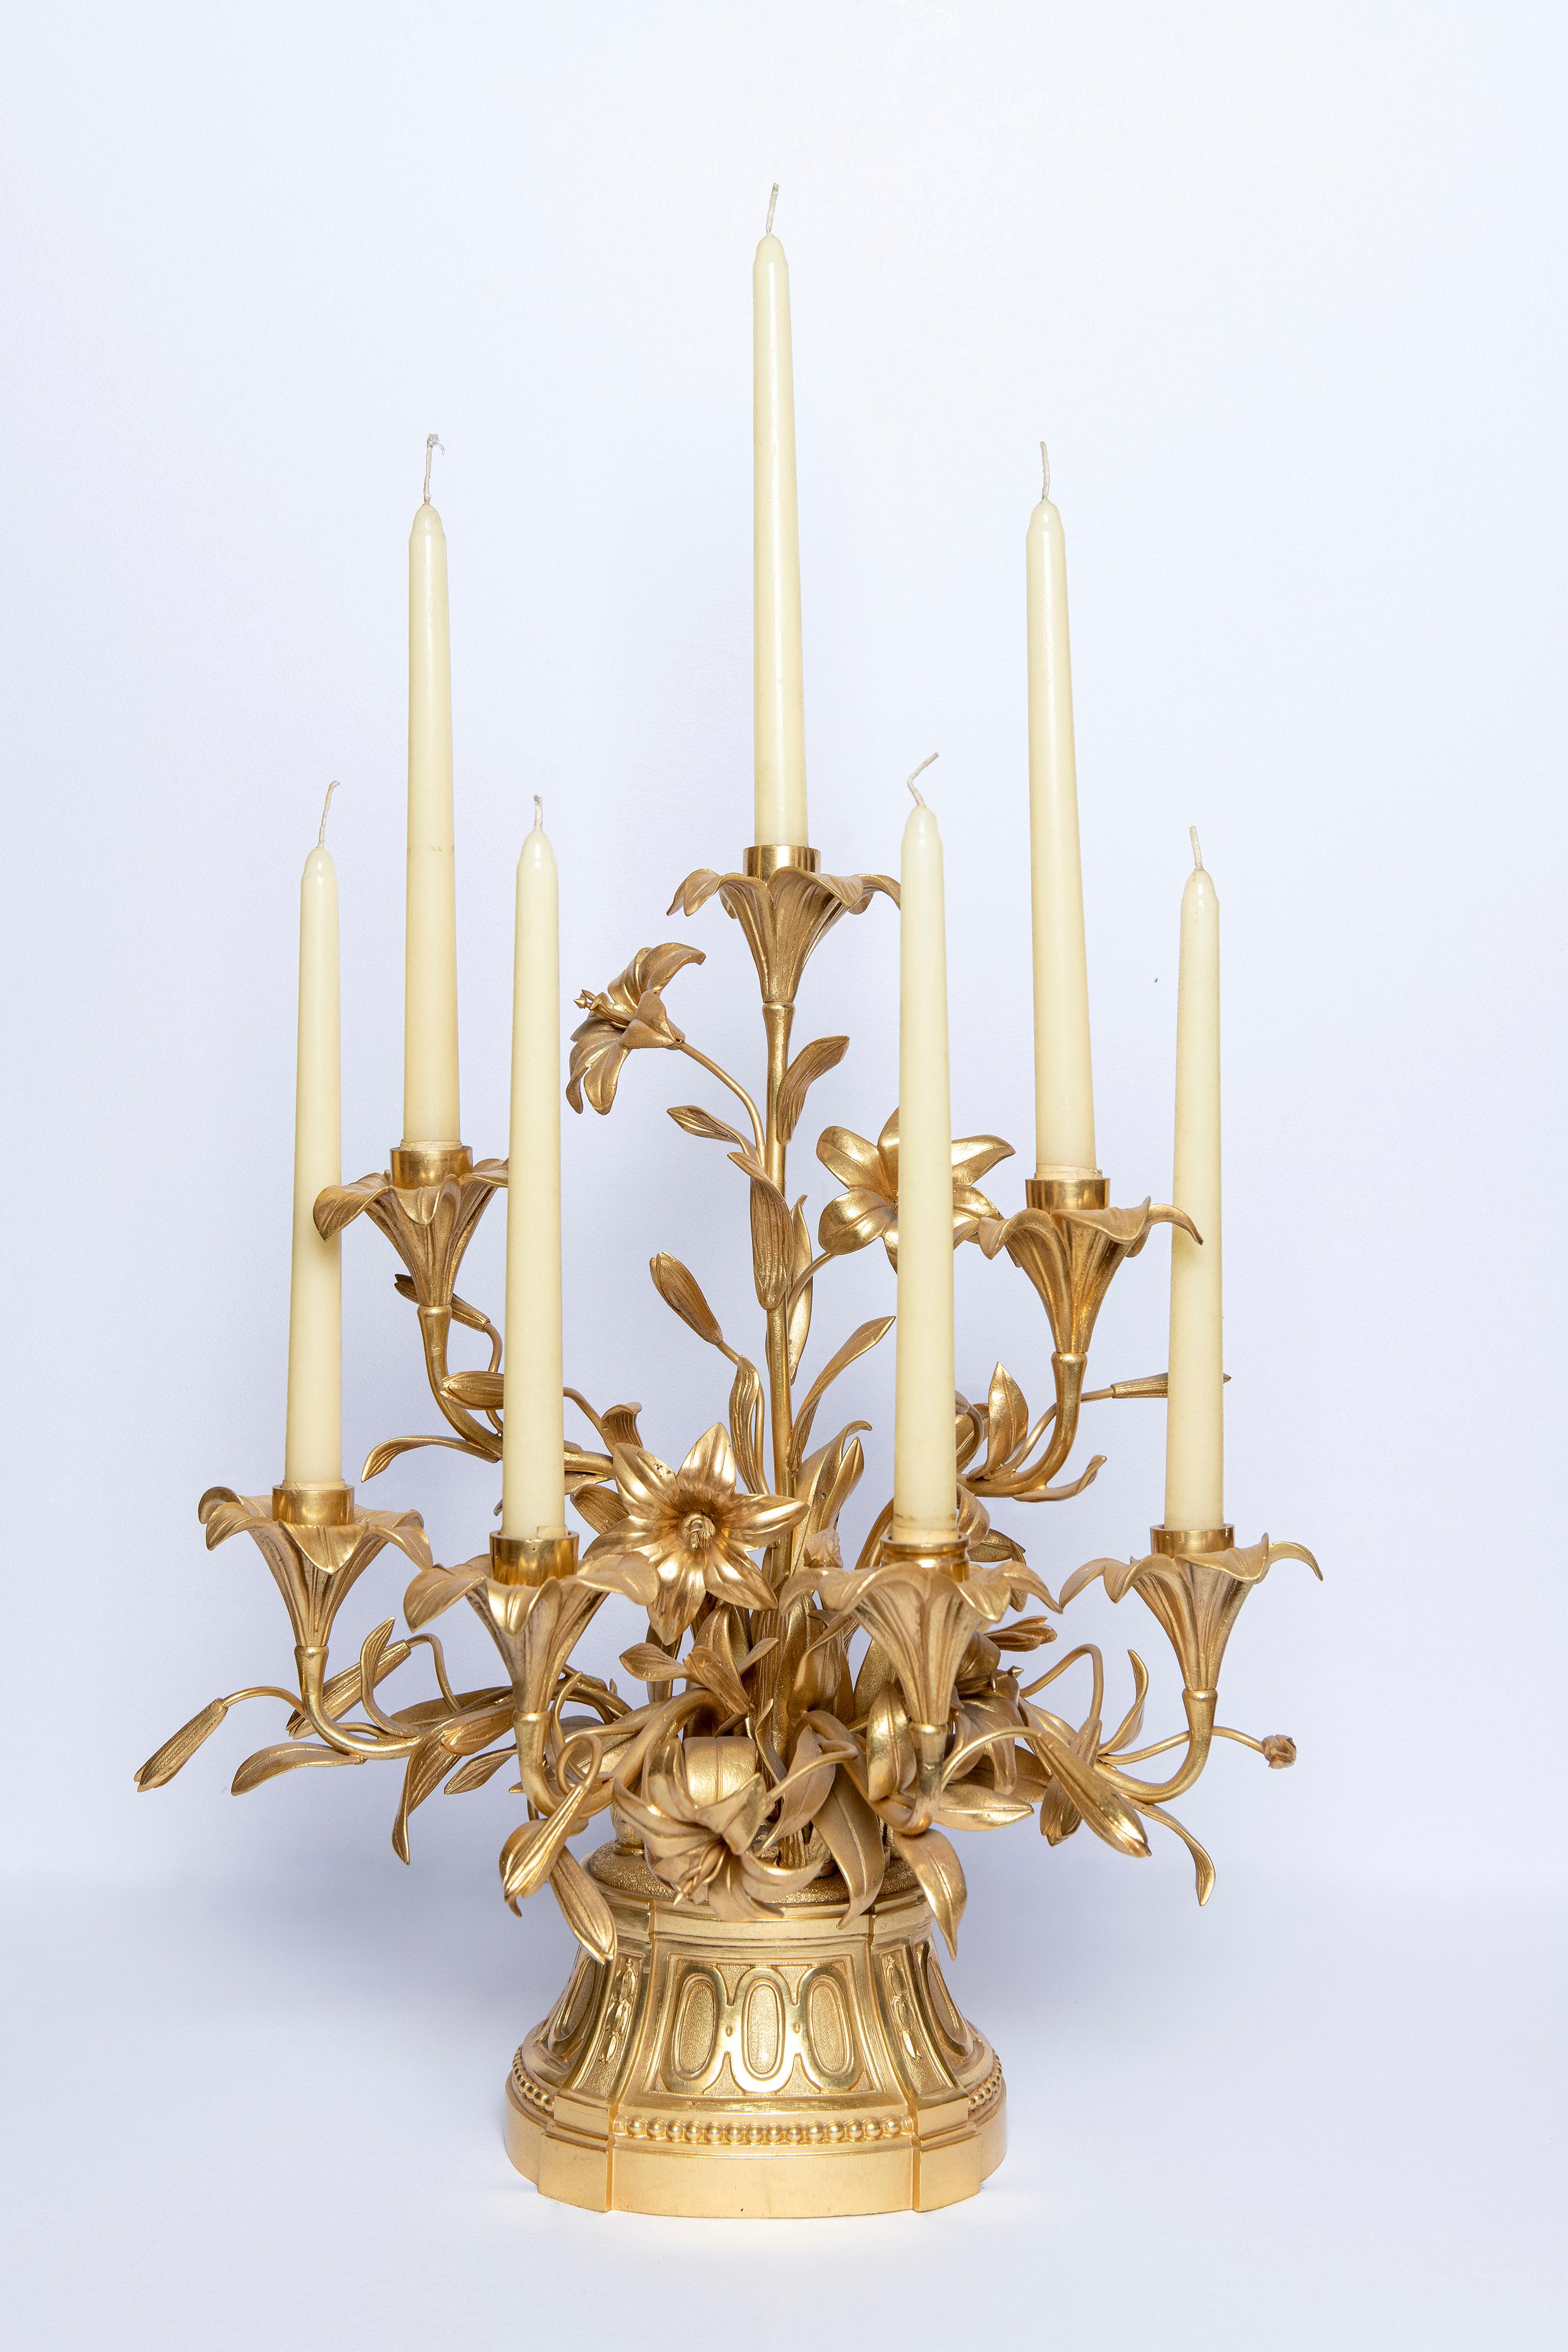 Pair of gilt bronze candelabras with flowers. France, late 19th century.